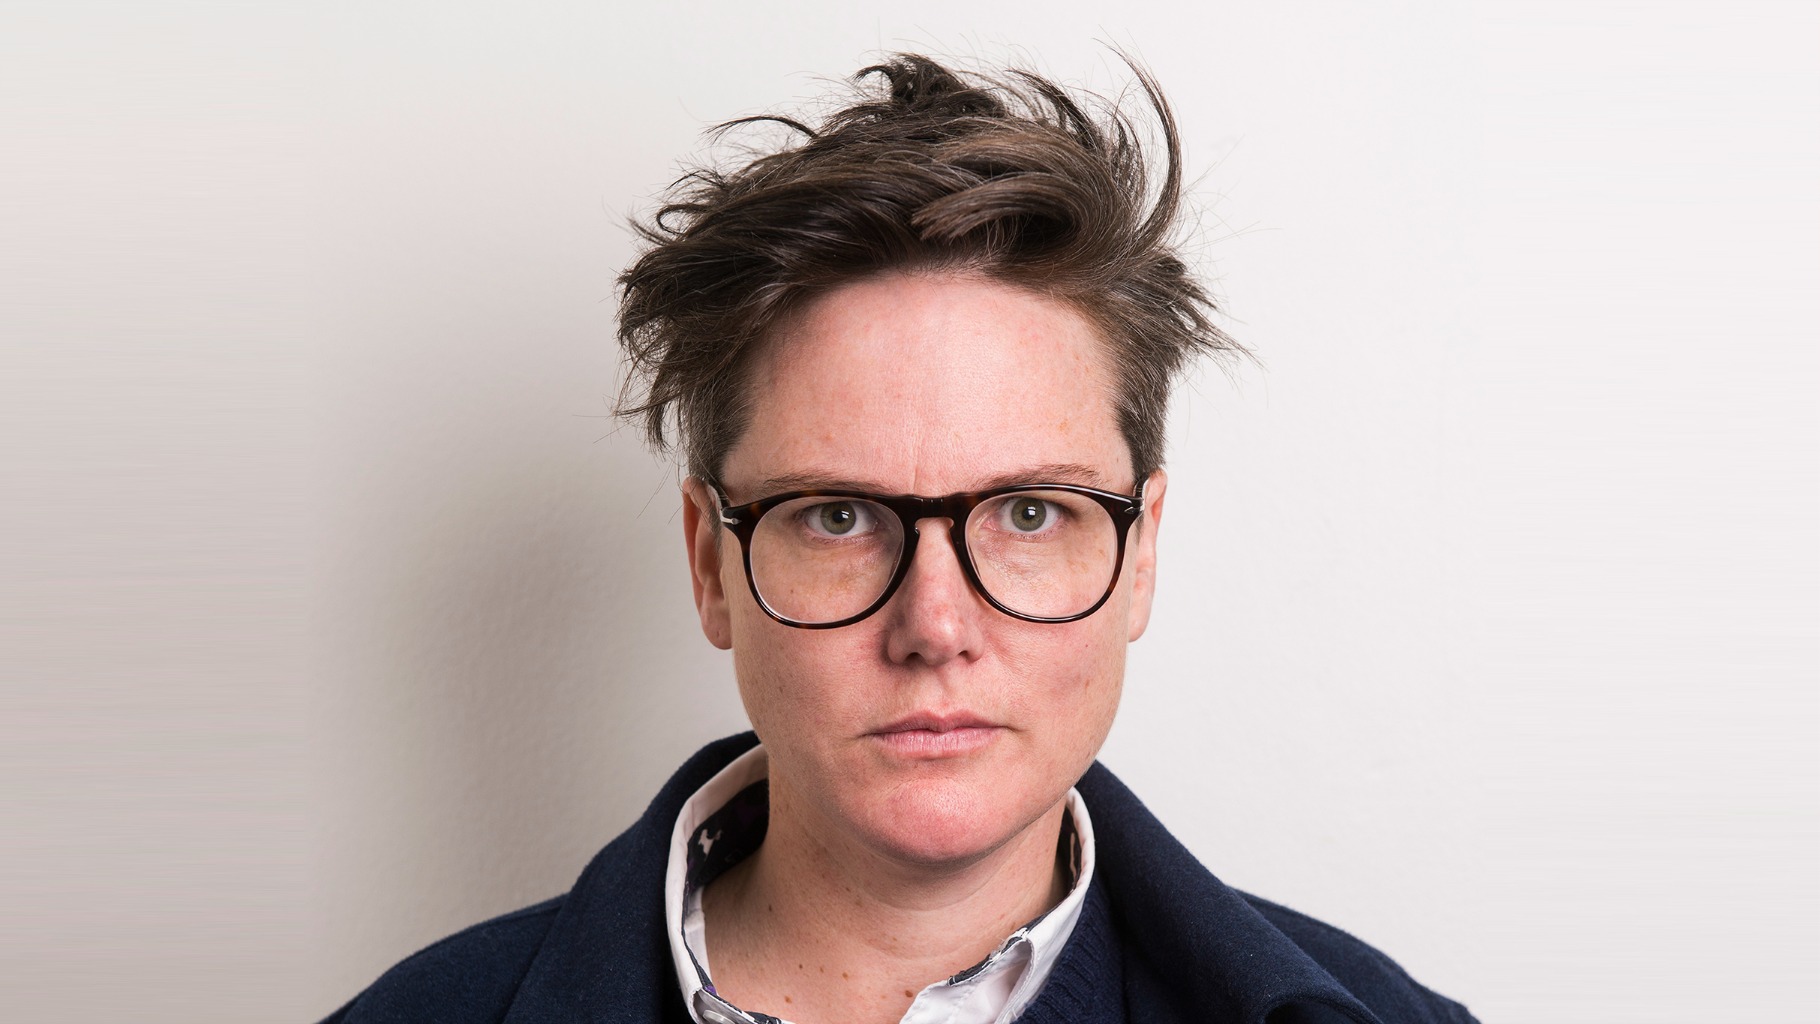 ‘If I quit, I’m an idiot’: Hannah Gadsby no longer quitting comedy after success of Nanette